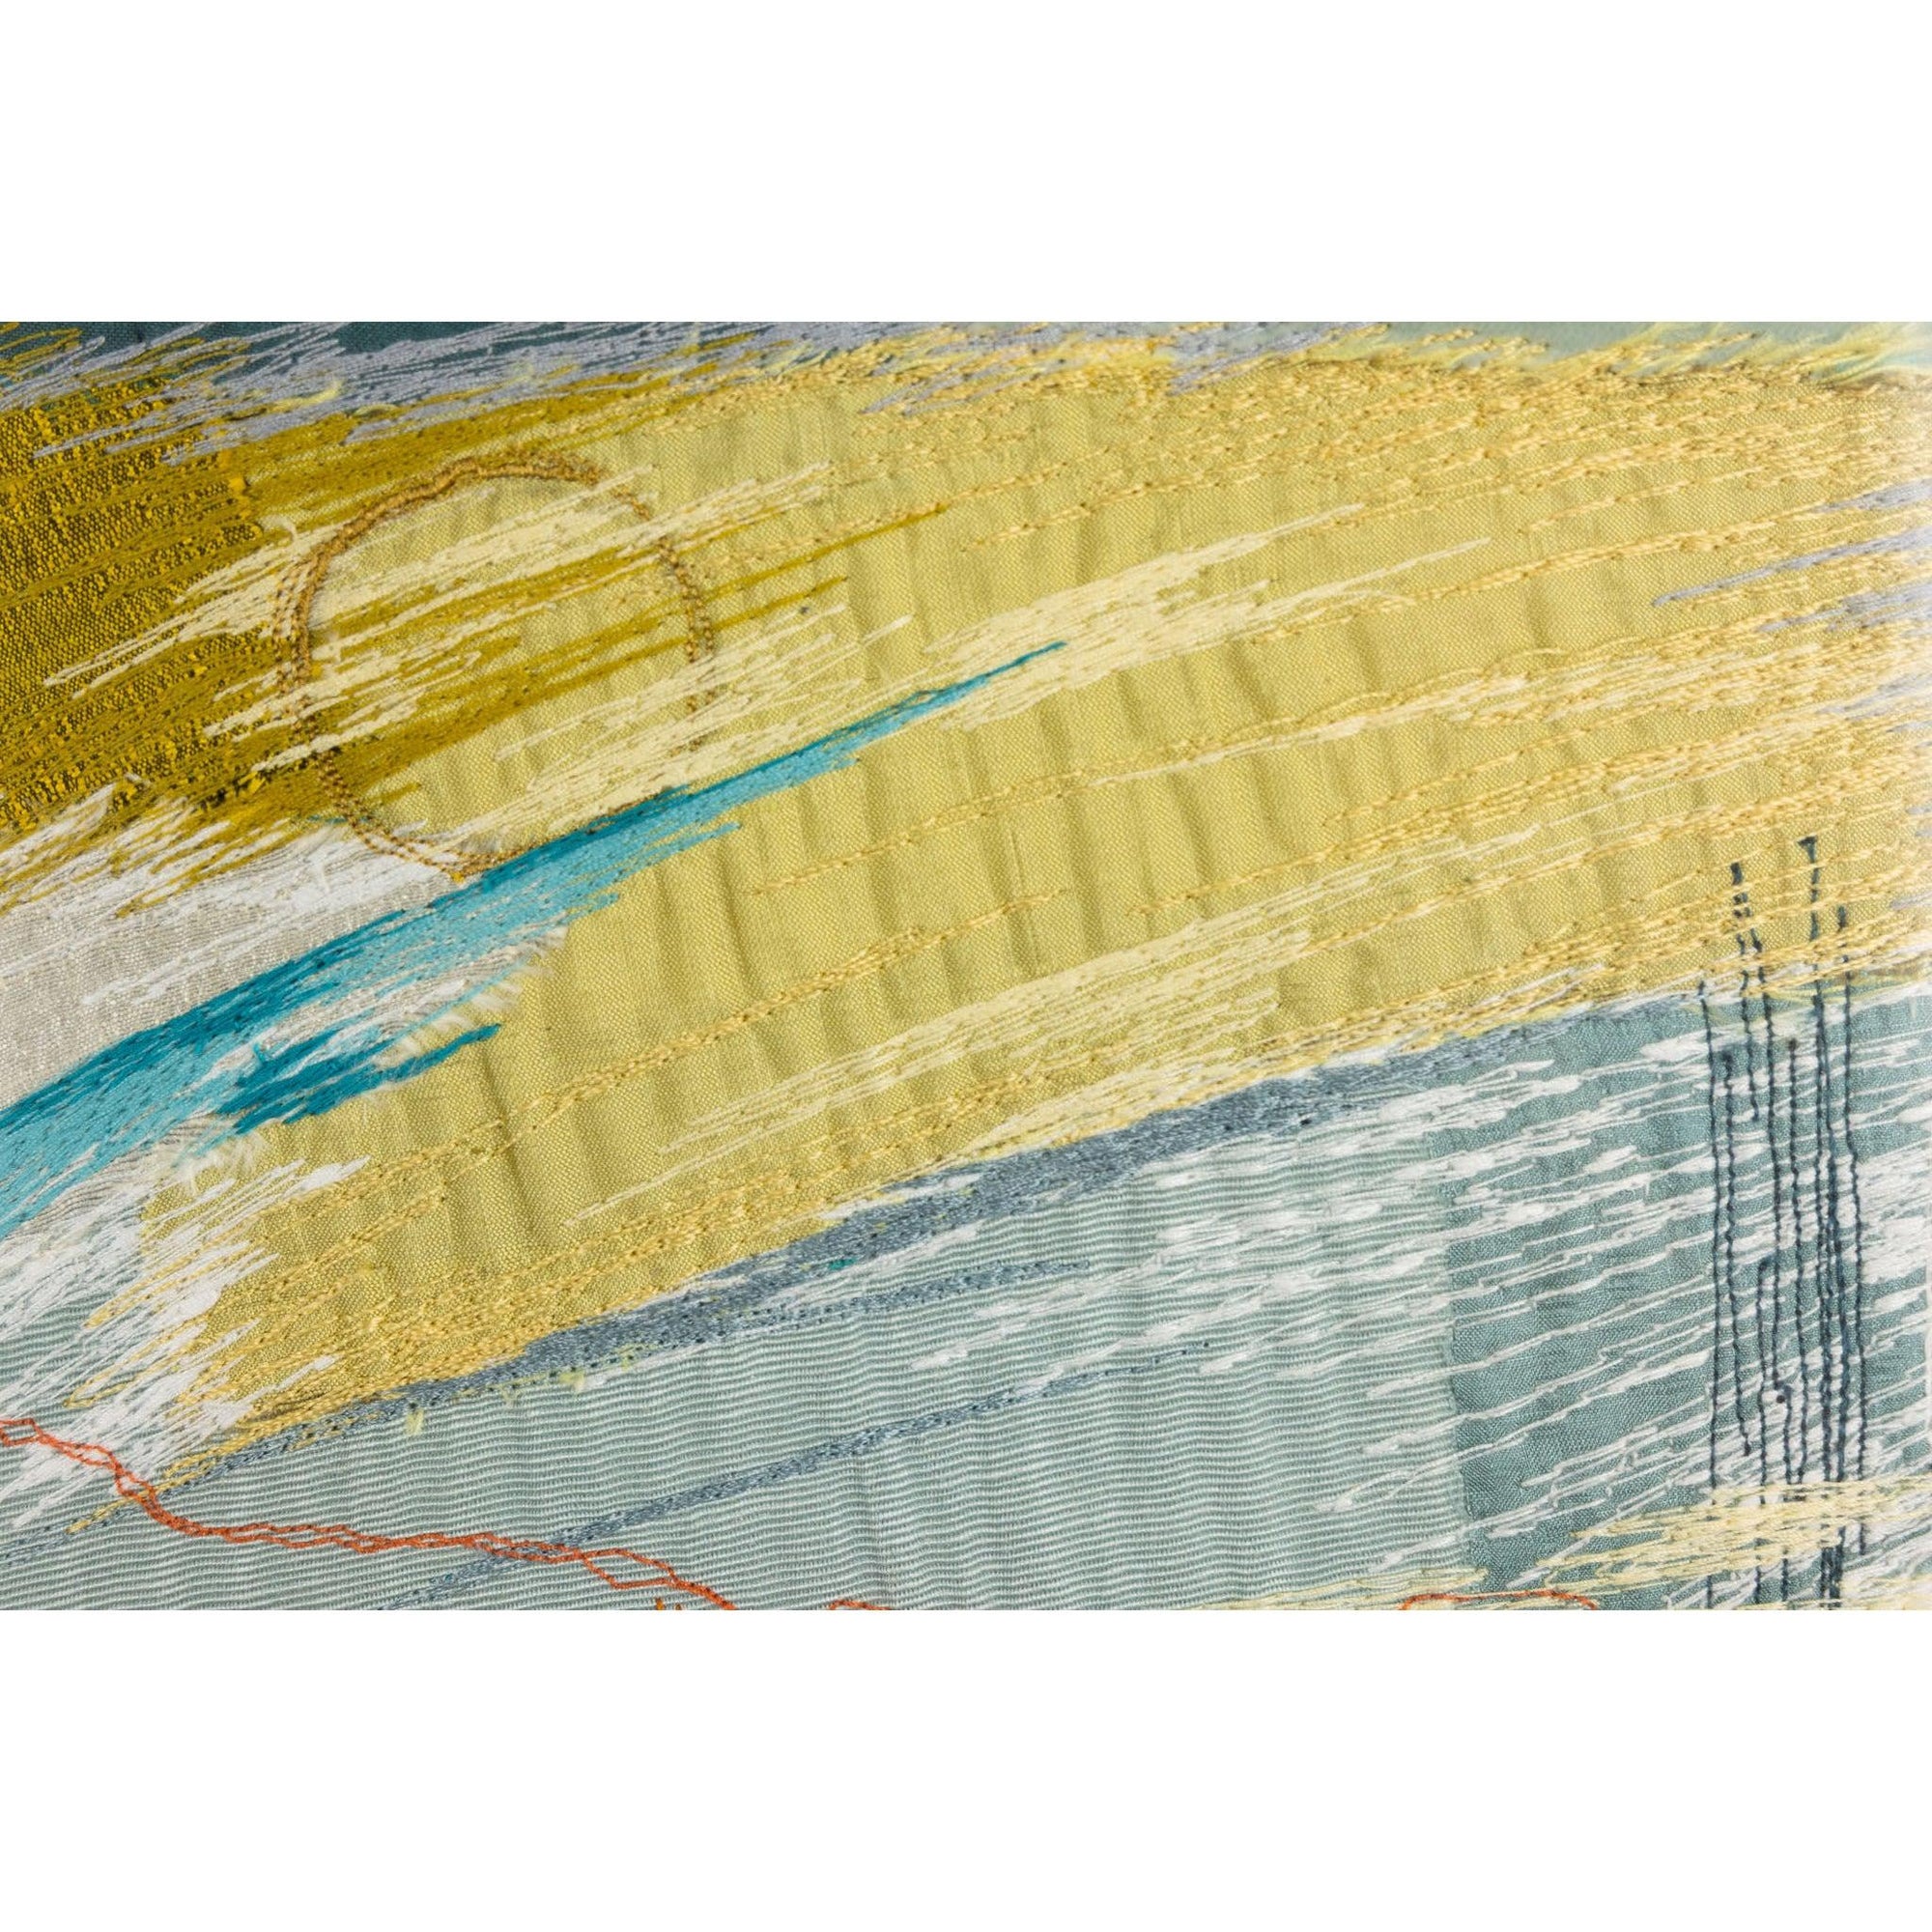 'Half a Yellow Sun' dynamic stitched textiles by Sarah Pooley, available at Padstow Gallery, Cornwall